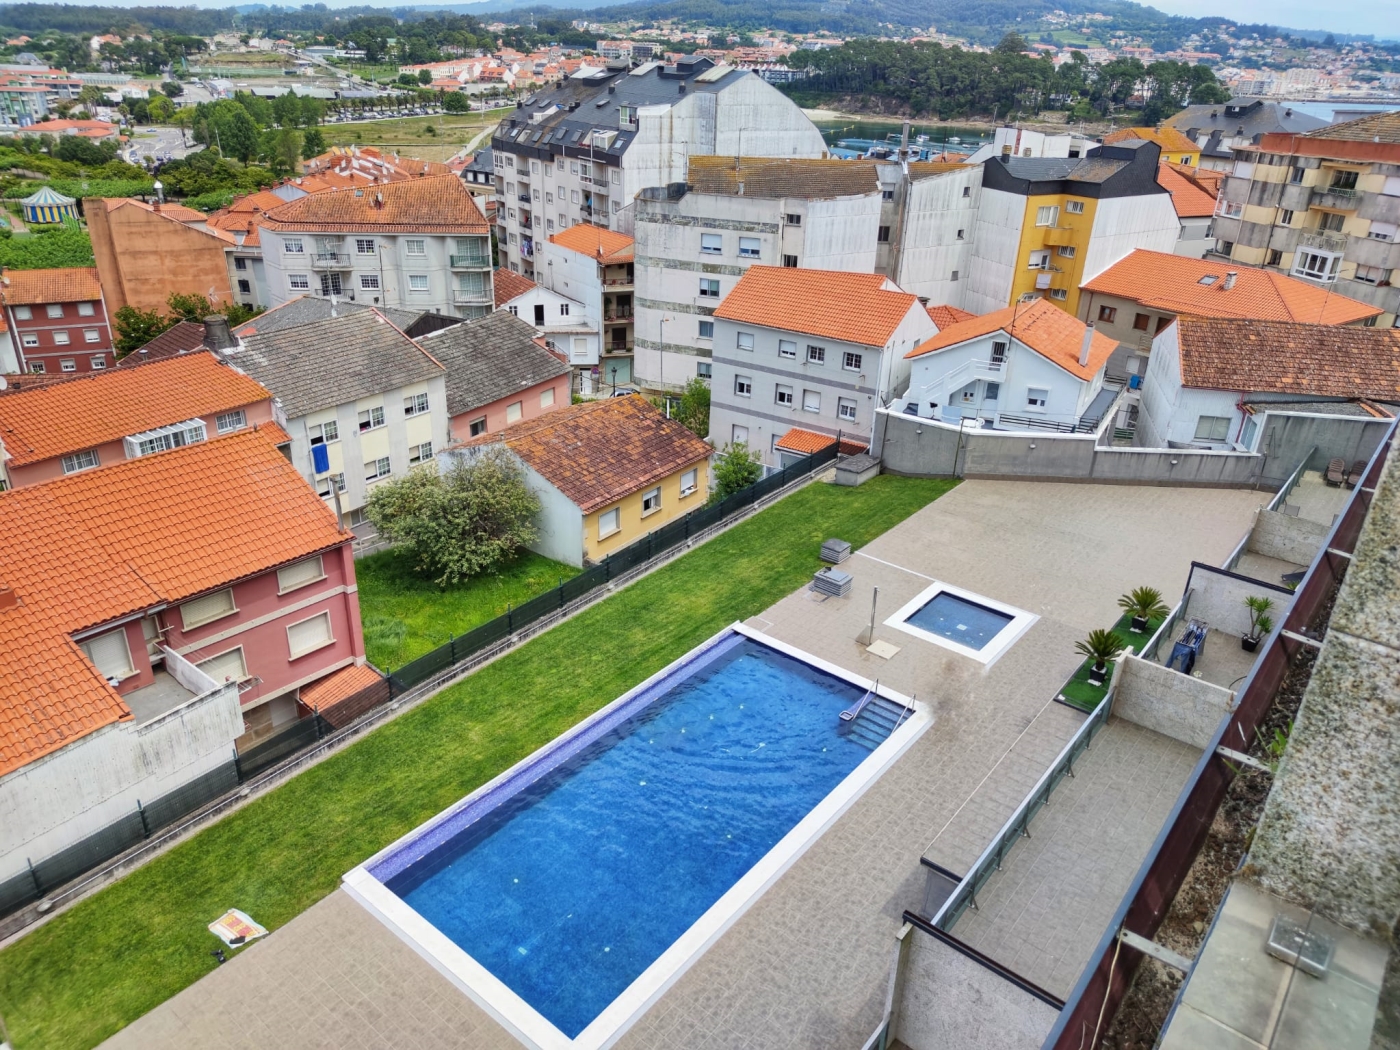 Penthouse with views,swimming pool, tennis court 200m from the beach in Sanxenxo